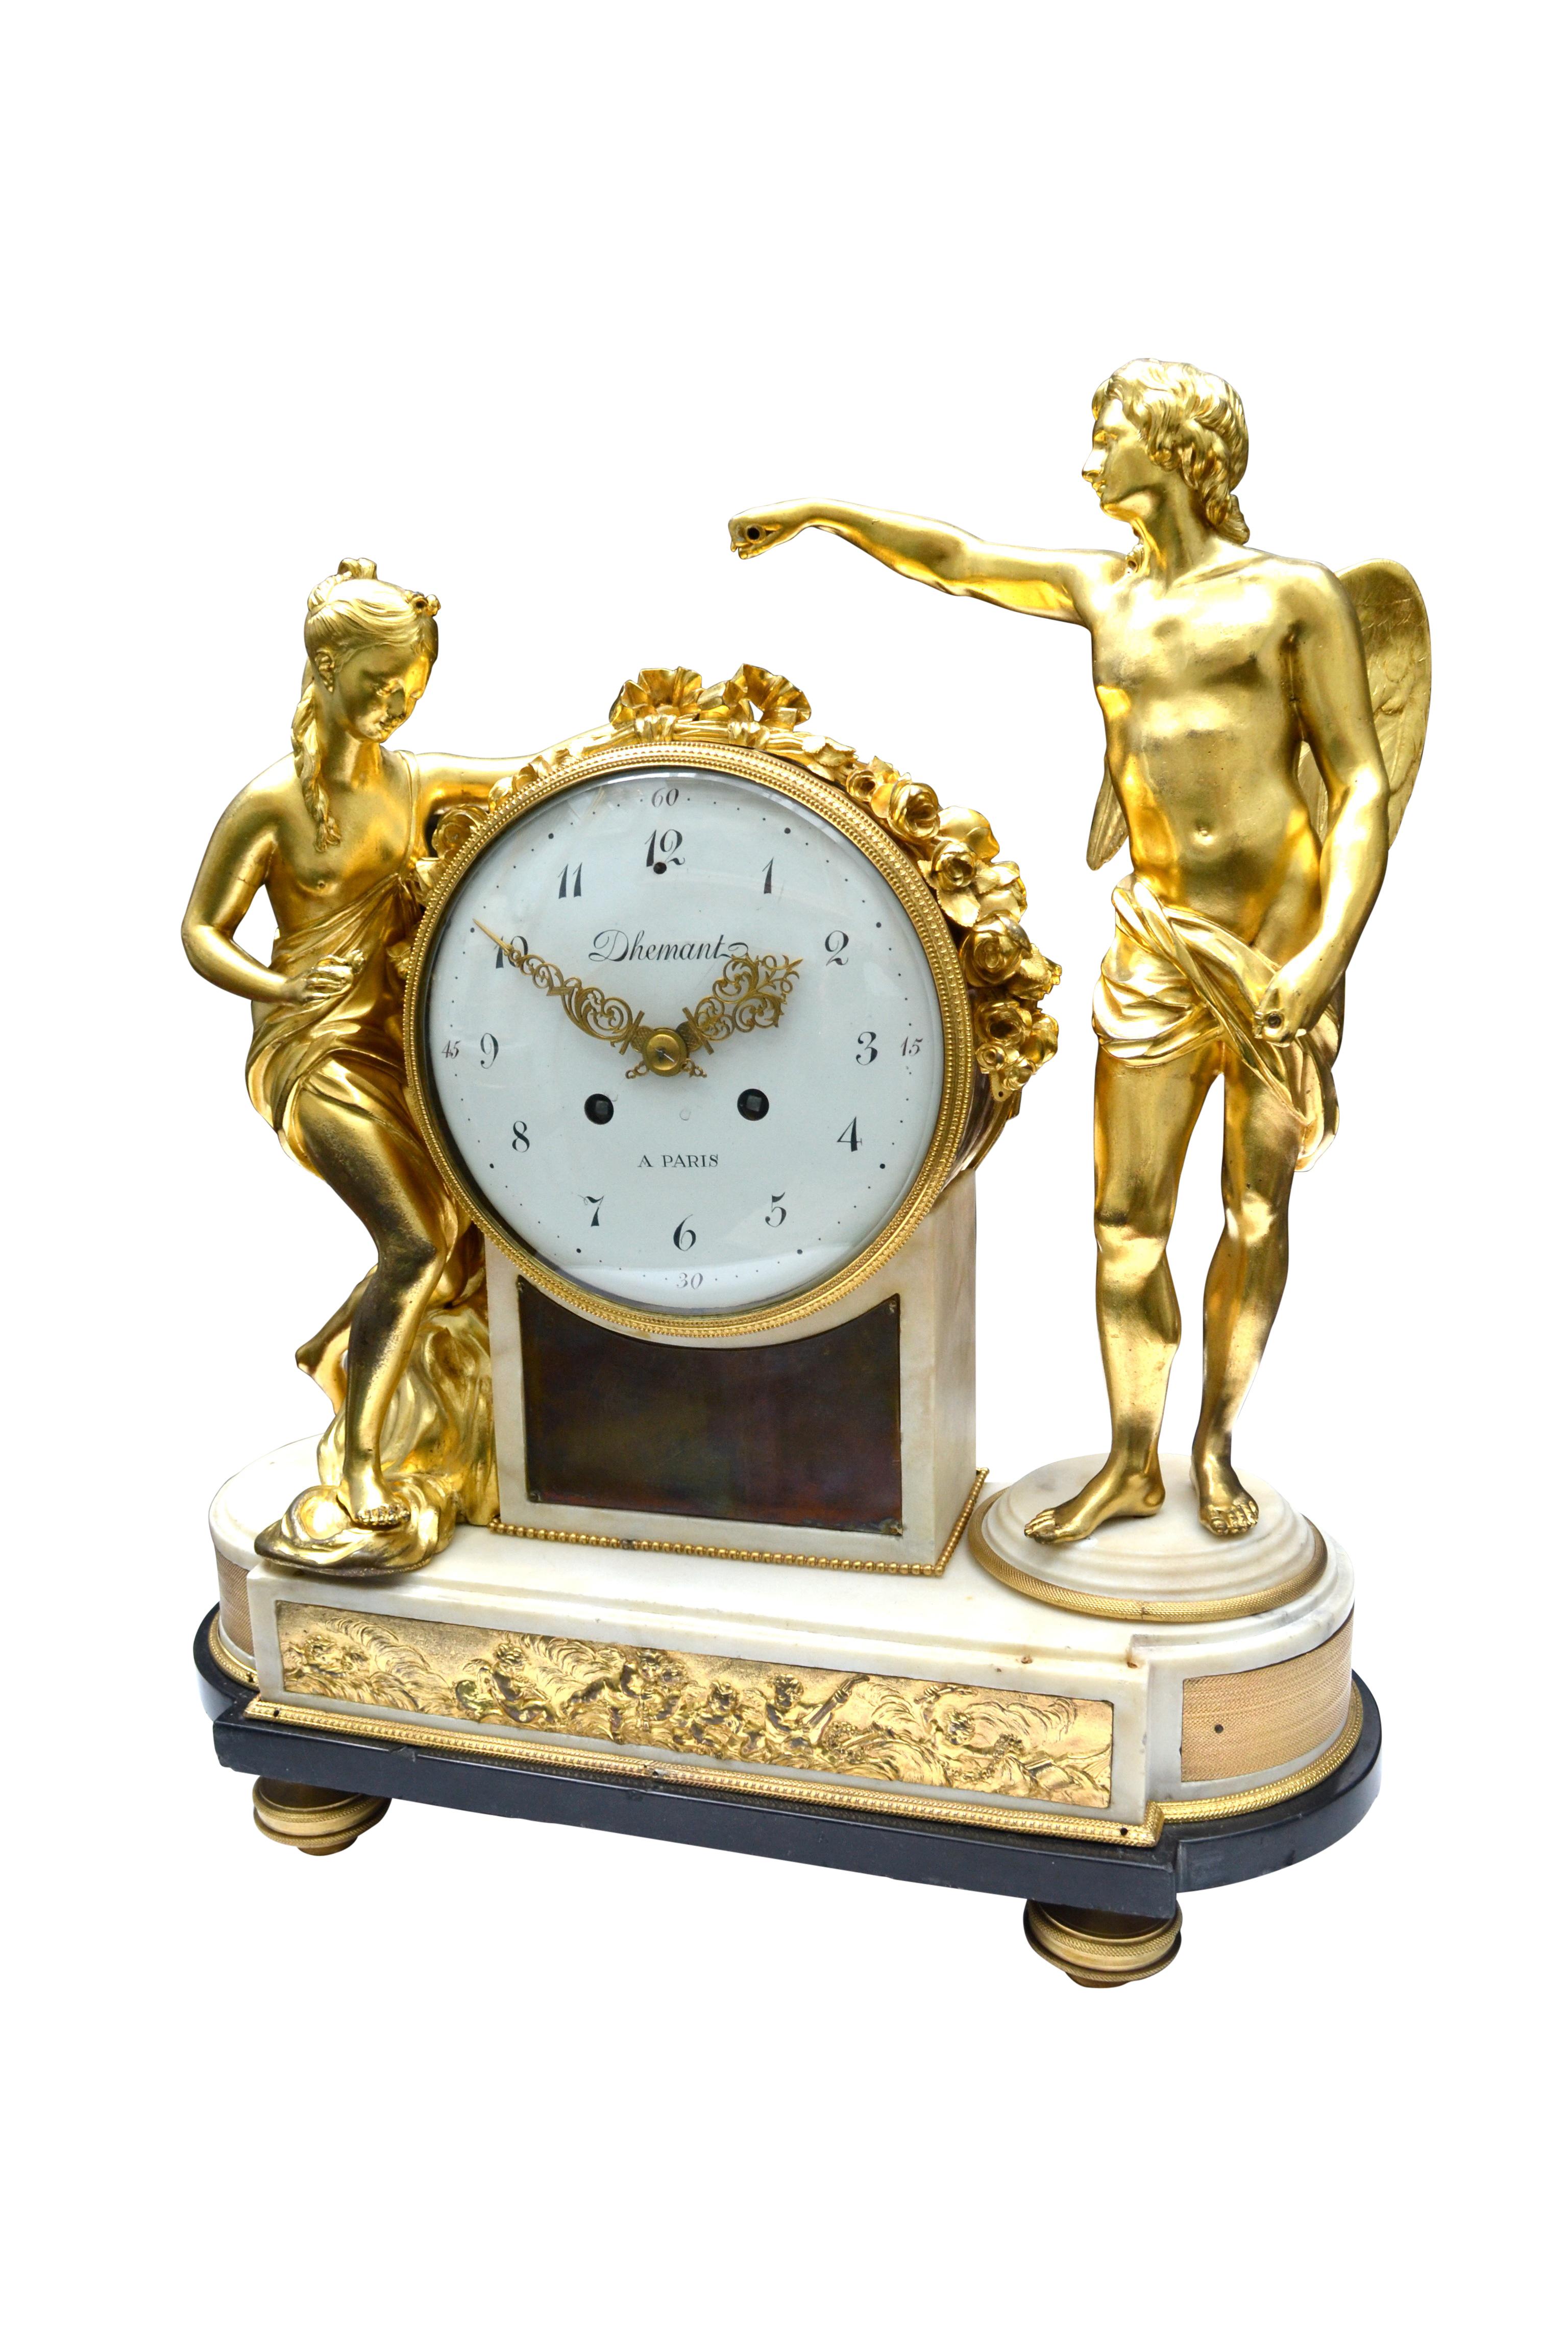 Gilt Louis XVI Allegorical Figurative Clock Depicting Venus Being Crowned by Amour For Sale